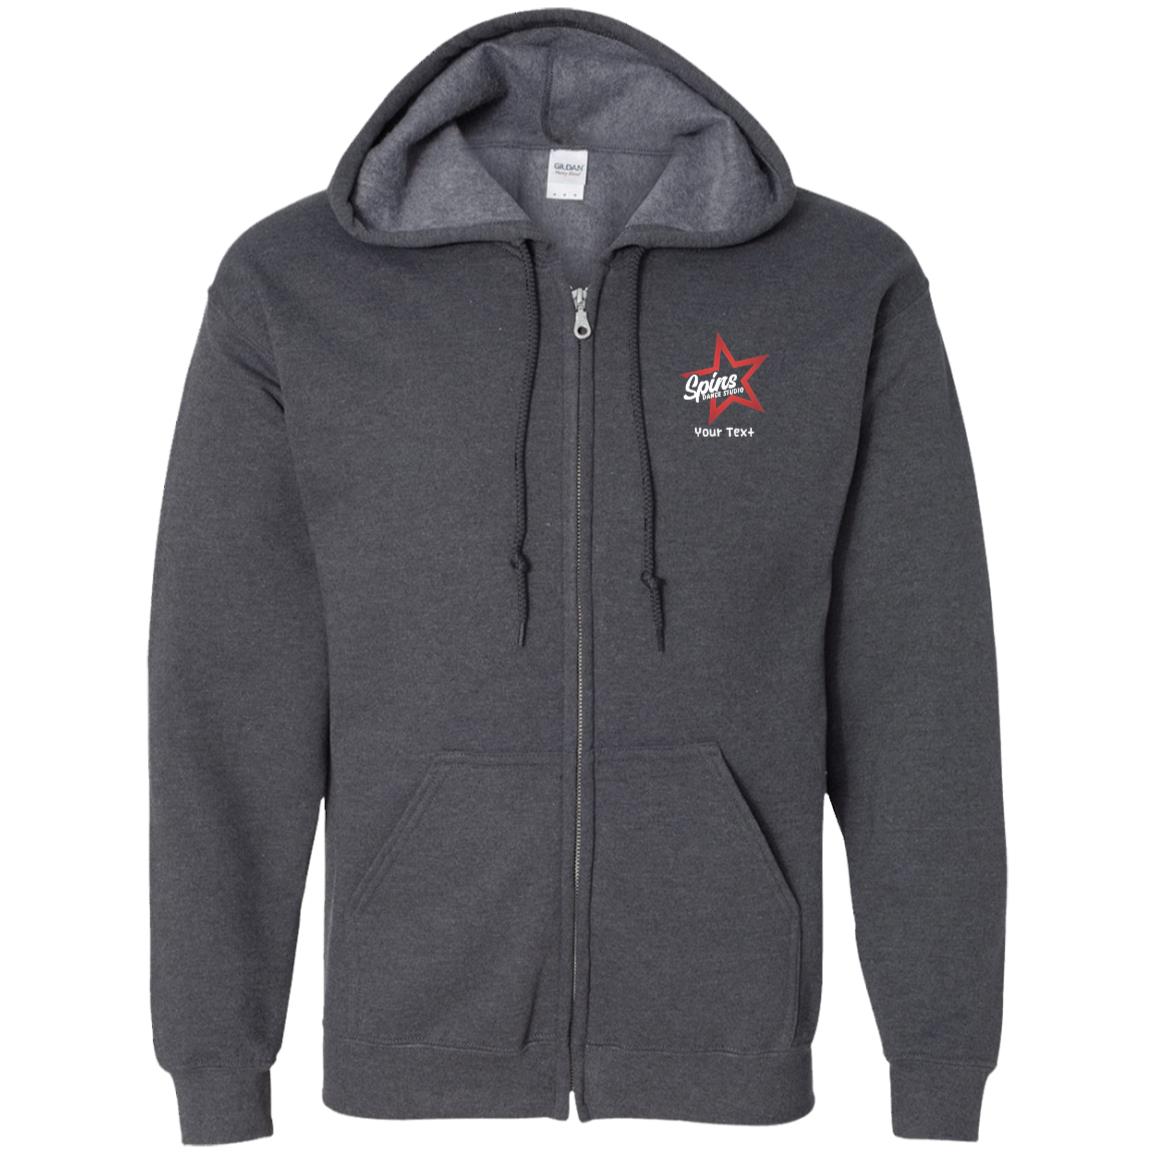 Spins Zip Up Hooded Sweatshirt - With Personalization